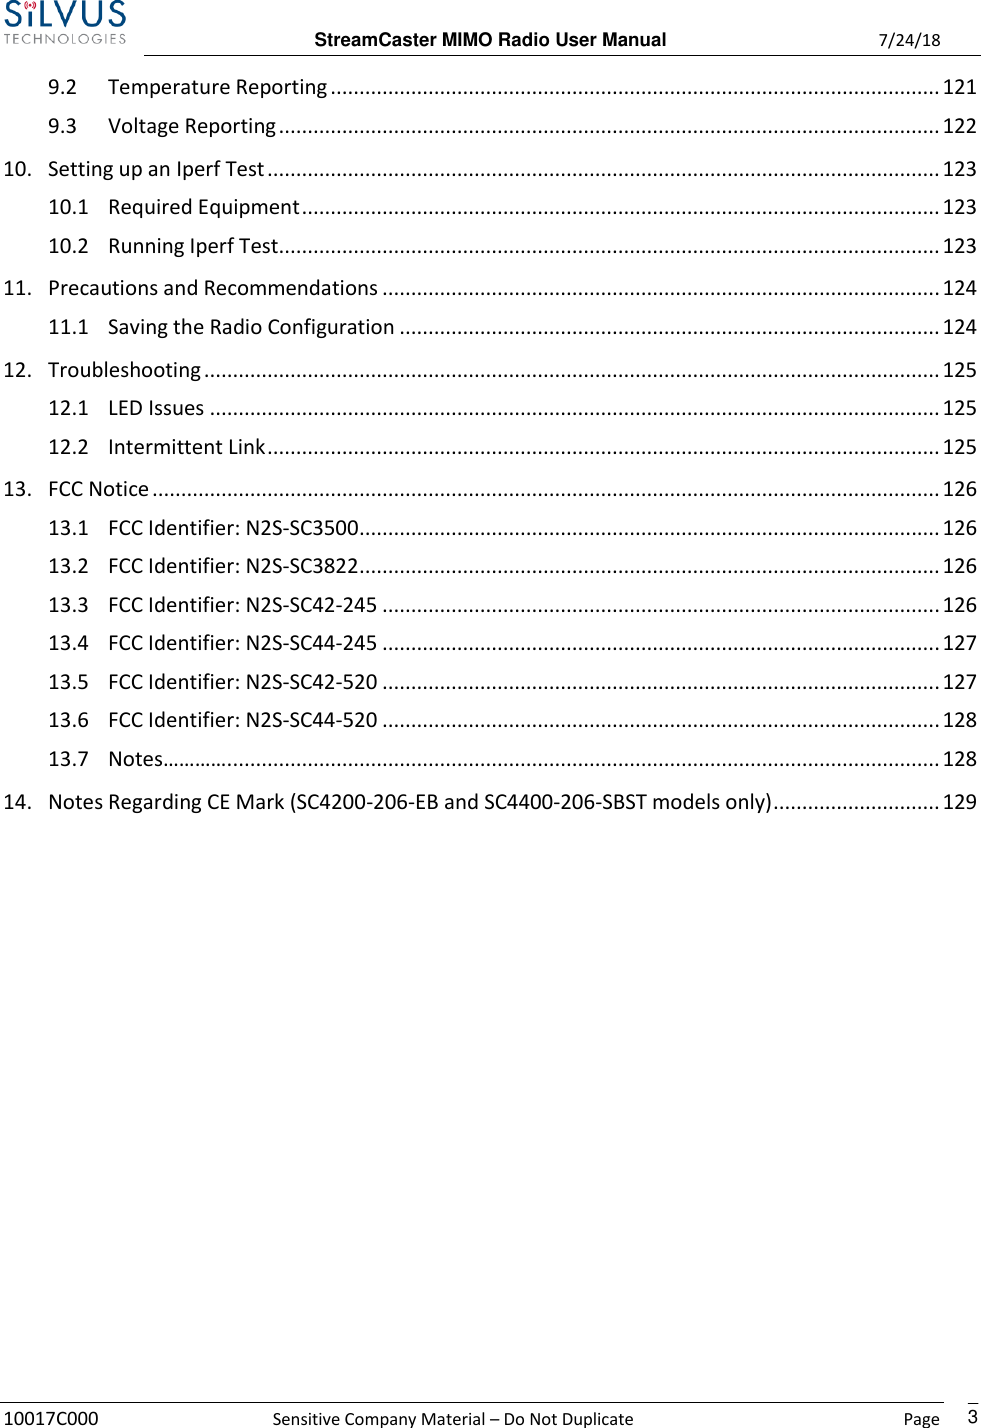  StreamCaster MIMO Radio User Manual  7/24/18 10017C000  Sensitive Company Material – Do Not Duplicate    Page    3 9.2  Temperature Reporting .......................................................................................................... 121 9.3  Voltage Reporting ................................................................................................................... 122 10.  Setting up an Iperf Test ..................................................................................................................... 123 10.1  Required Equipment ............................................................................................................... 123 10.2  Running Iperf Test................................................................................................................... 123 11.  Precautions and Recommendations ................................................................................................. 124 11.1  Saving the Radio Configuration .............................................................................................. 124 12.  Troubleshooting ................................................................................................................................ 125 12.1  LED Issues ............................................................................................................................... 125 12.2  Intermittent Link ..................................................................................................................... 125 13.  FCC Notice ......................................................................................................................................... 126 13.1  FCC Identifier: N2S-SC3500 ..................................................................................................... 126 13.2  FCC Identifier: N2S-SC3822 ..................................................................................................... 126 13.3  FCC Identifier: N2S-SC42-245 ................................................................................................. 126 13.4  FCC Identifier: N2S-SC44-245 ................................................................................................. 127 13.5  FCC Identifier: N2S-SC42-520 ................................................................................................. 127 13.6  FCC Identifier: N2S-SC44-520 ................................................................................................. 128 13.7  Notes…………. ........................................................................................................................... 128 14.  Notes Regarding CE Mark (SC4200-206-EB and SC4400-206-SBST models only) ............................. 129             